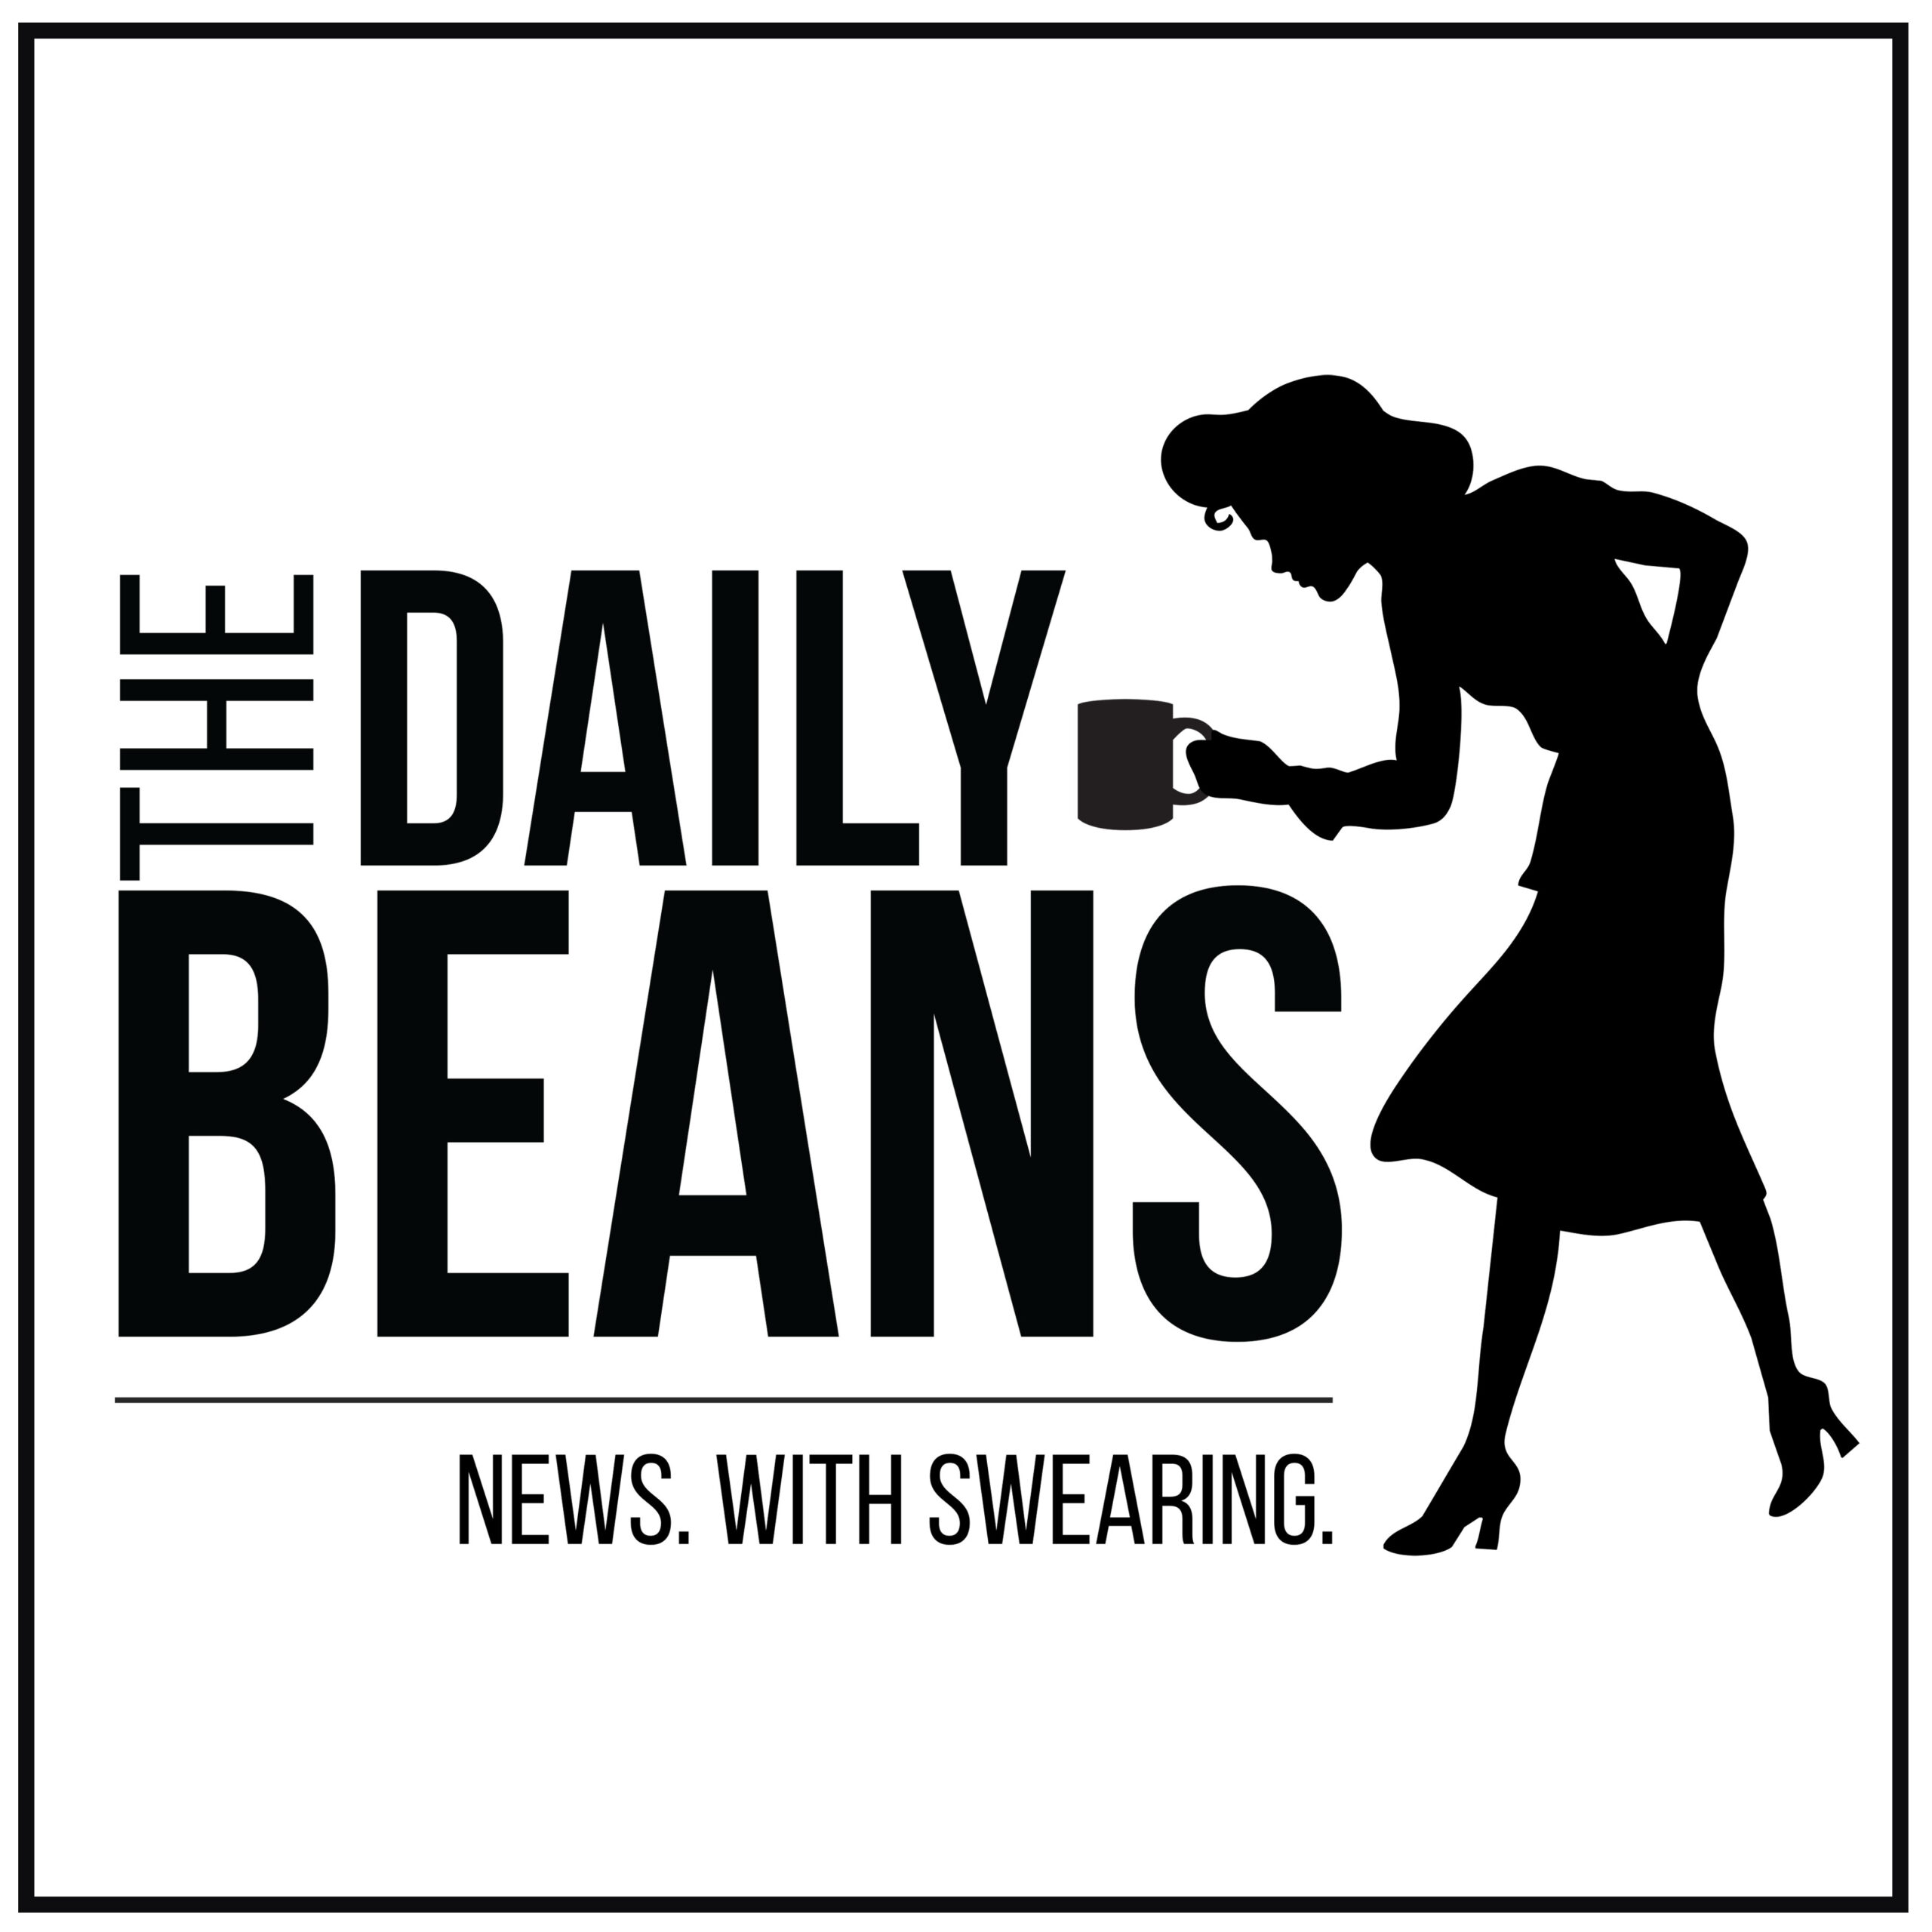 The Daily Beans with Allison Gill